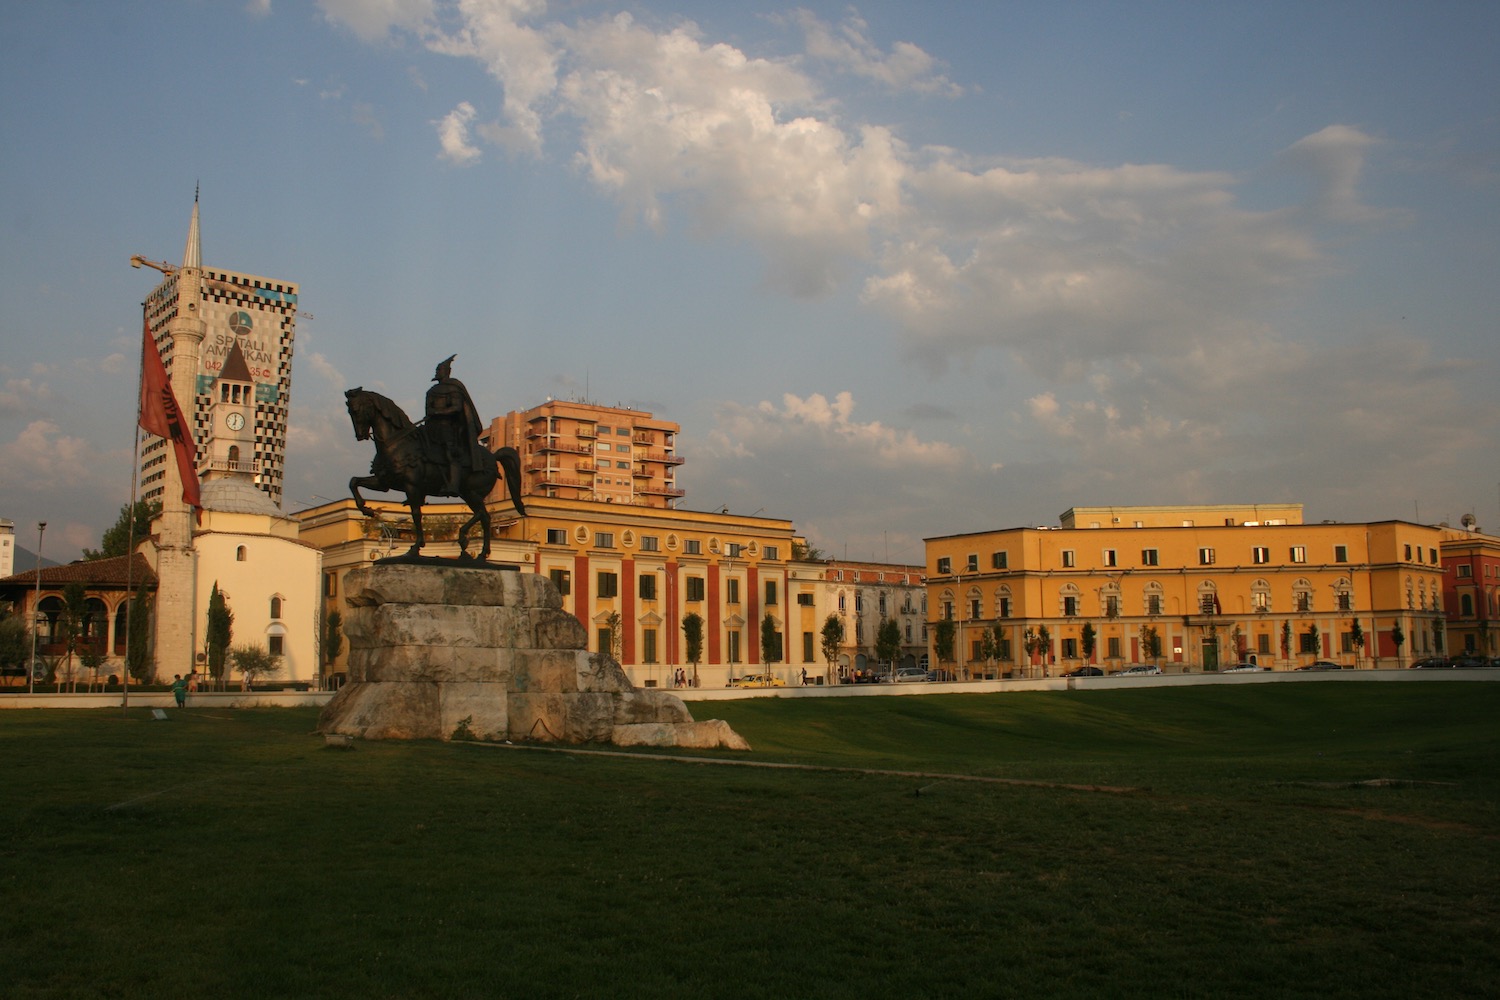 a statue of a man on a horse in a park with buildings in the background